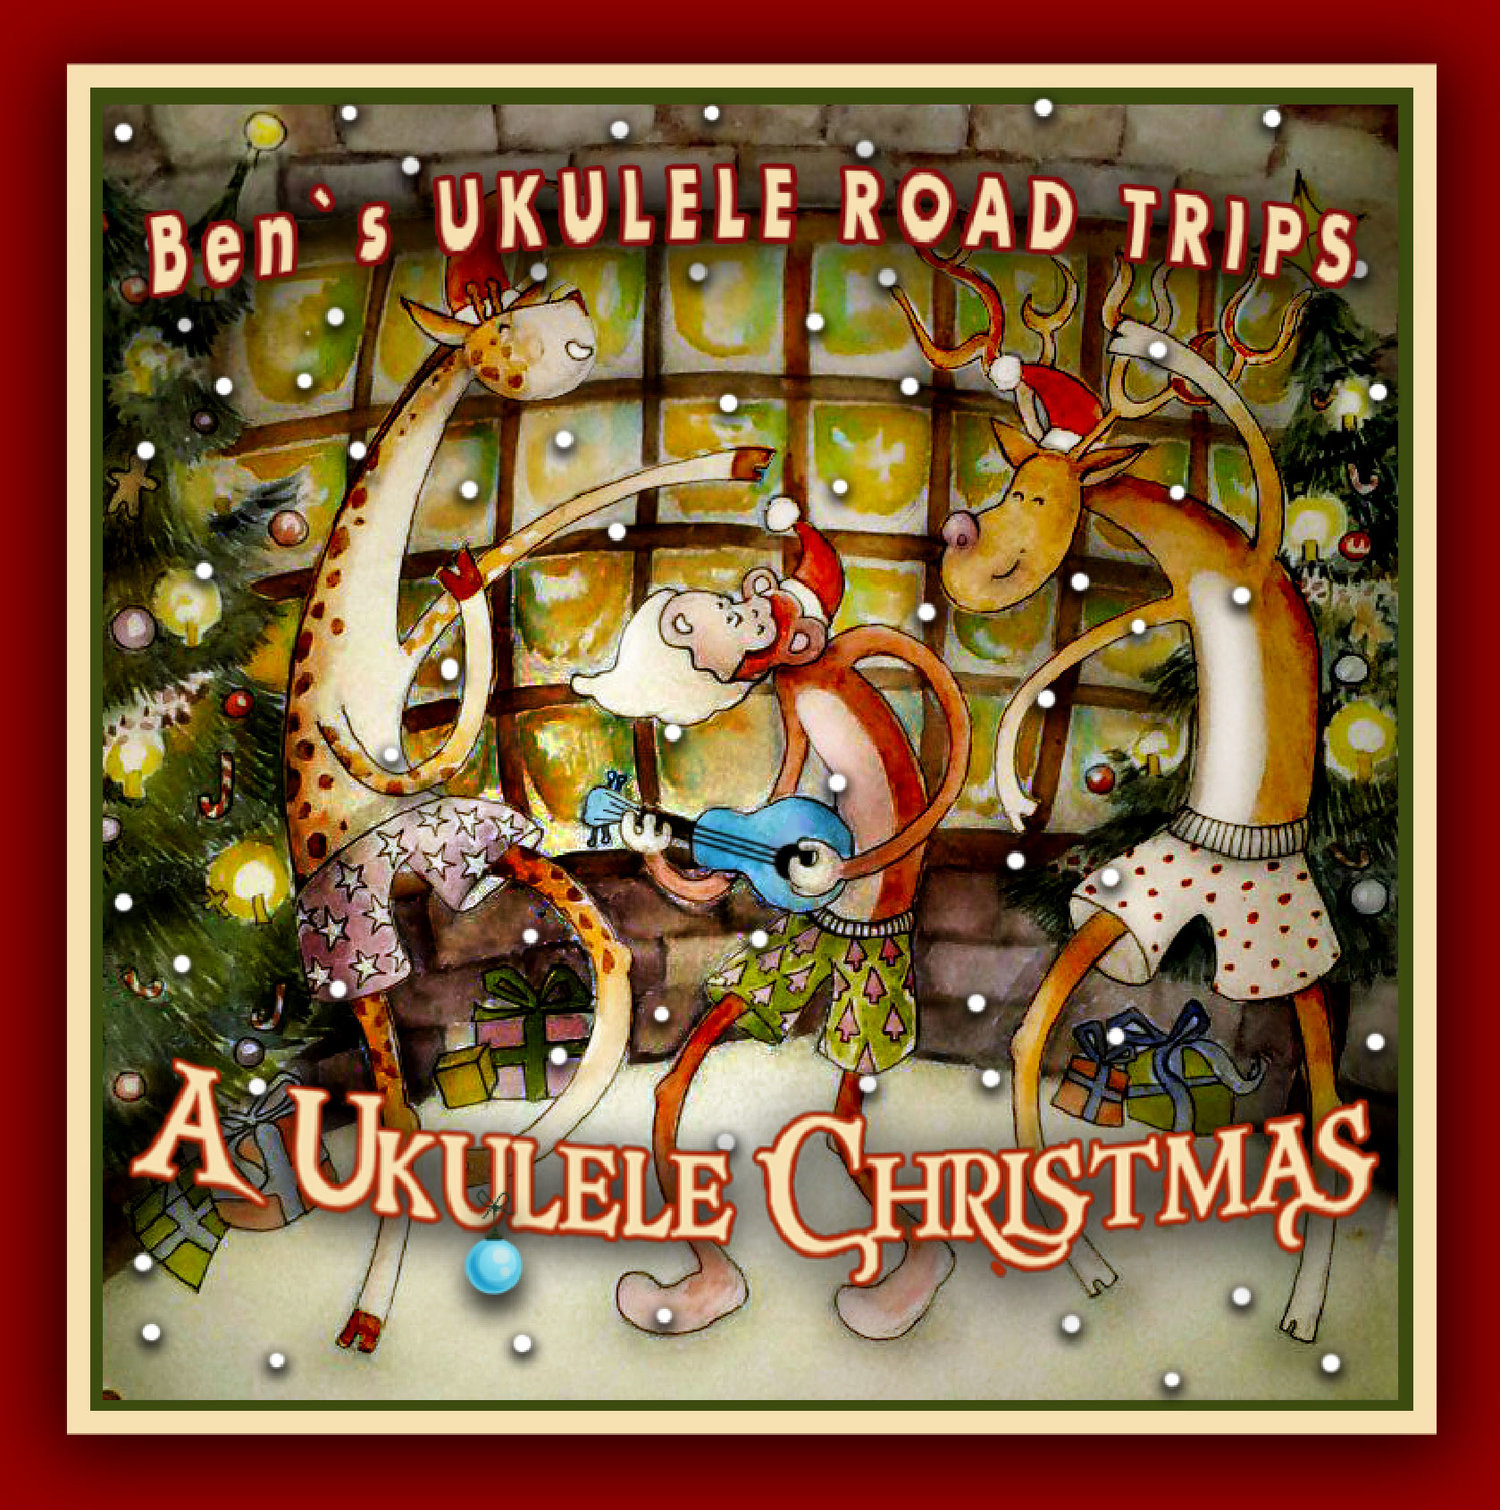 A Ukulele Christmas + Request a Phone-in Song — Ukulele Road Trips